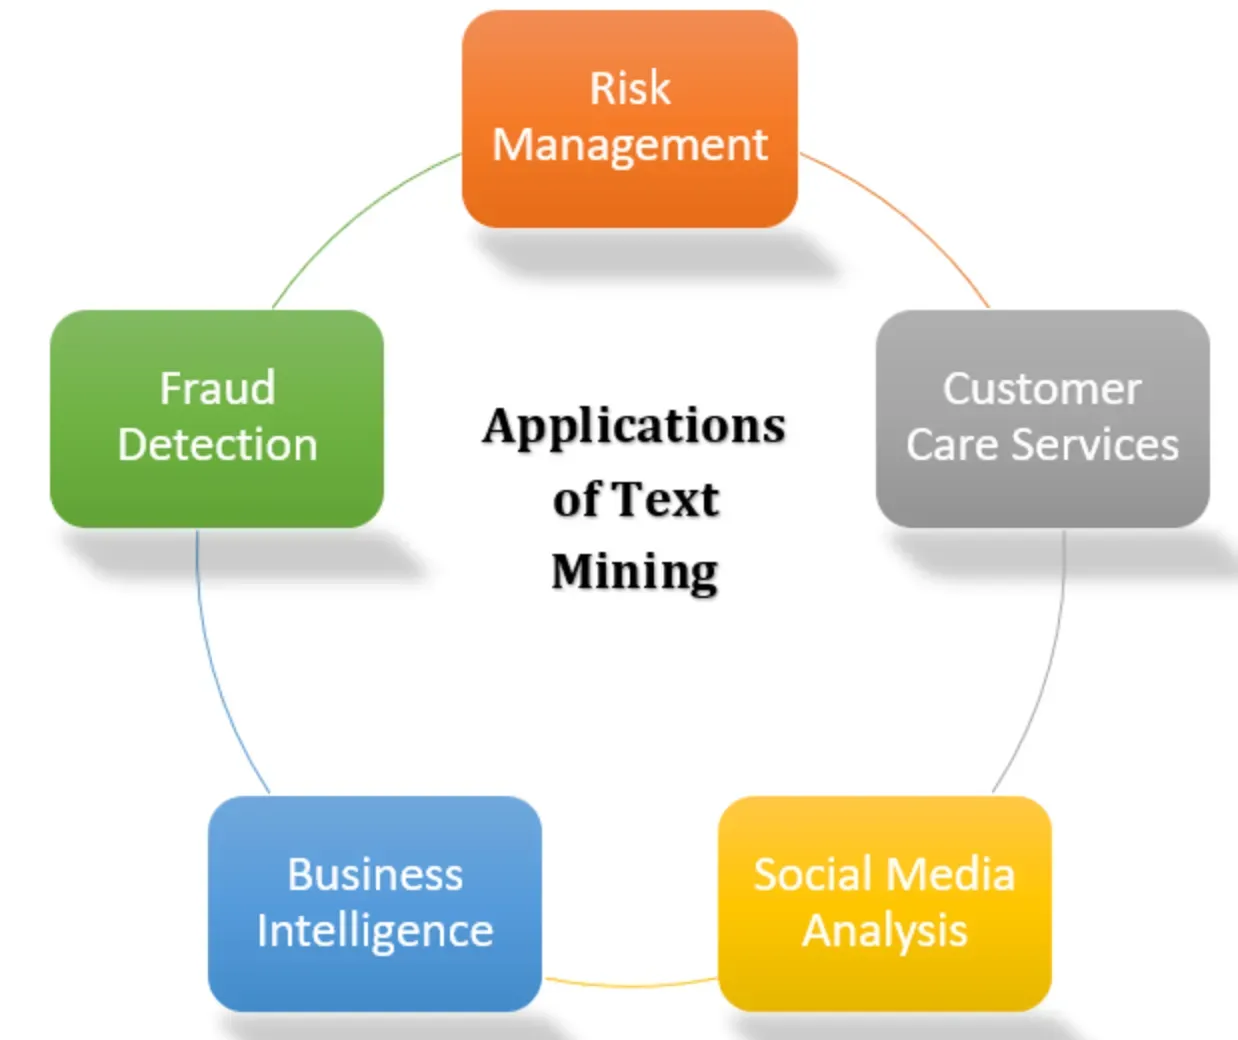 Applications of Text Mining